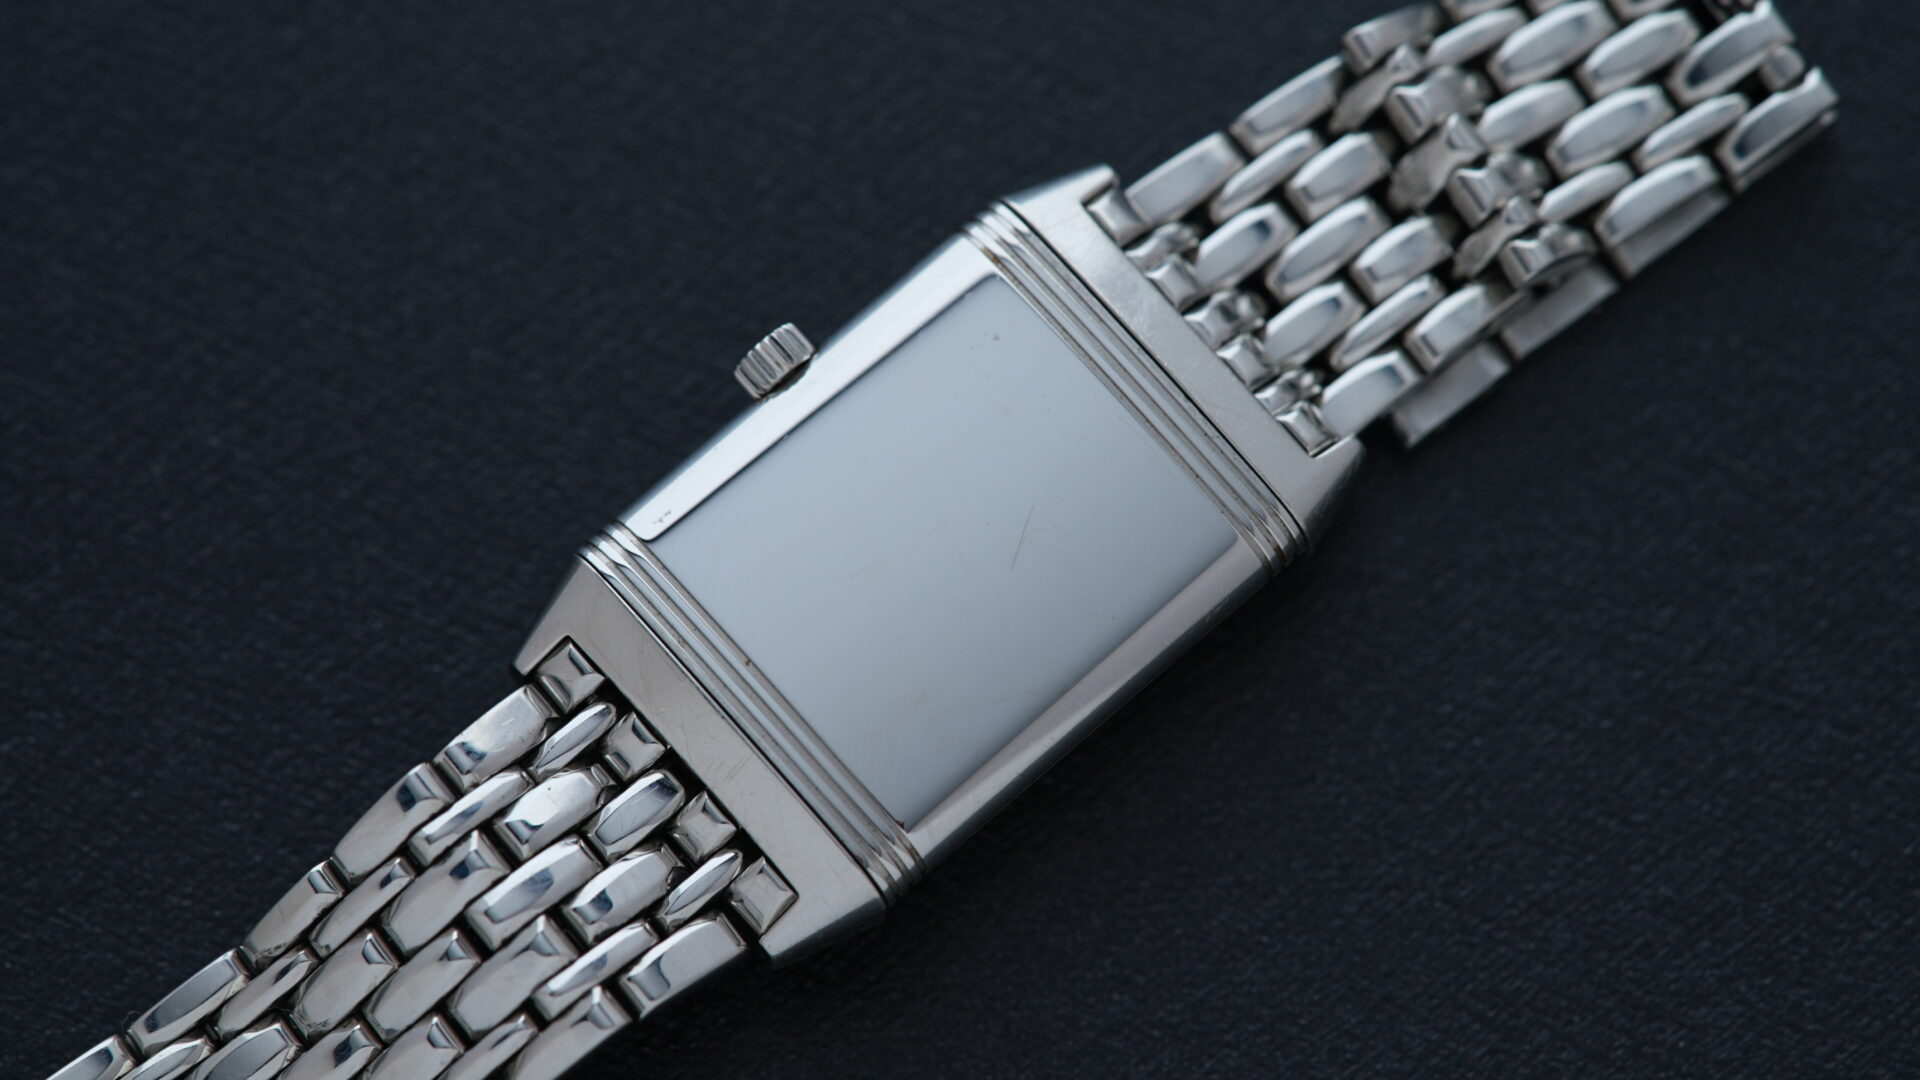 Back side of the Jaeger-LeCoultre Reverso Classique 252.8.86 watch.